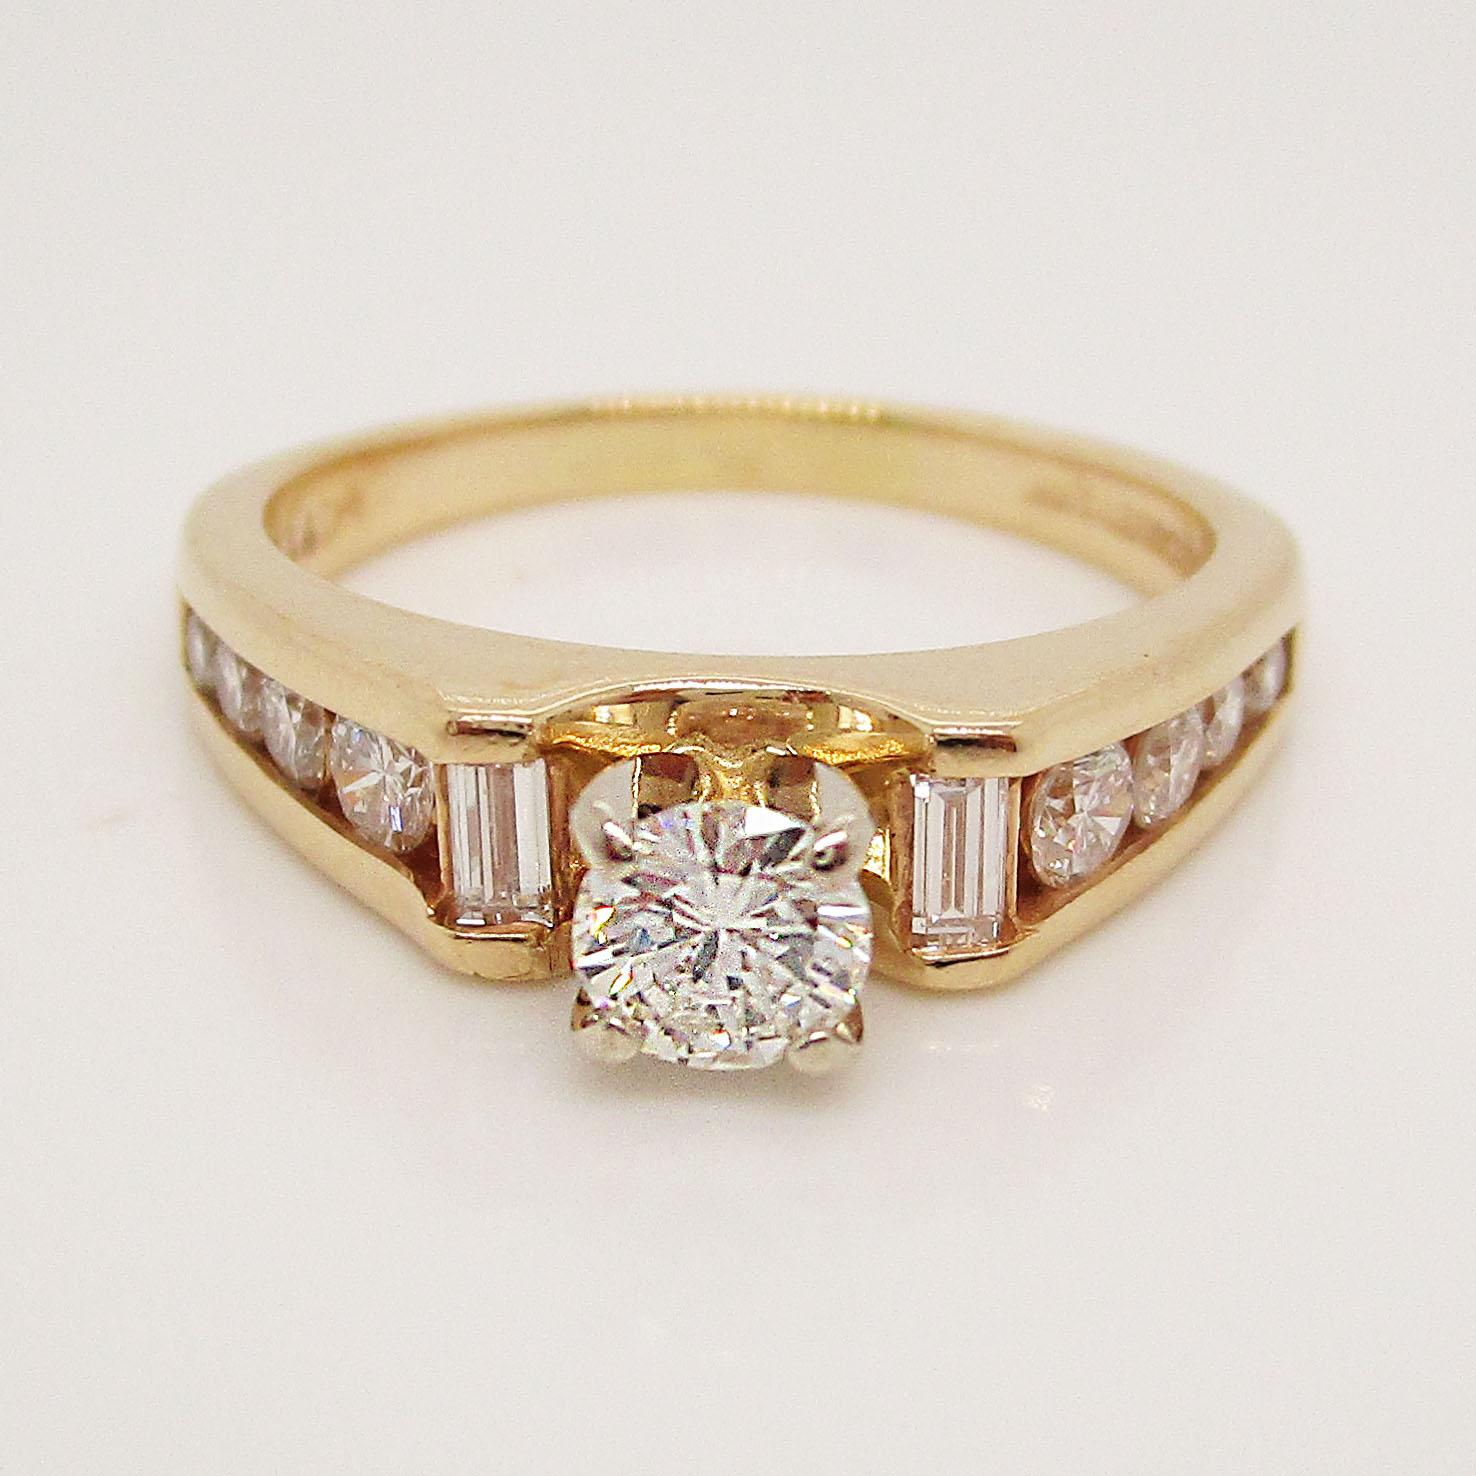 This absolutely beautiful ring is in 14k yellow gold and has a stunning collection of baguette and round diamonds to accent the brilliant white round center stone. This ring has the classic beauty of a traditional engagement ring but is made unique